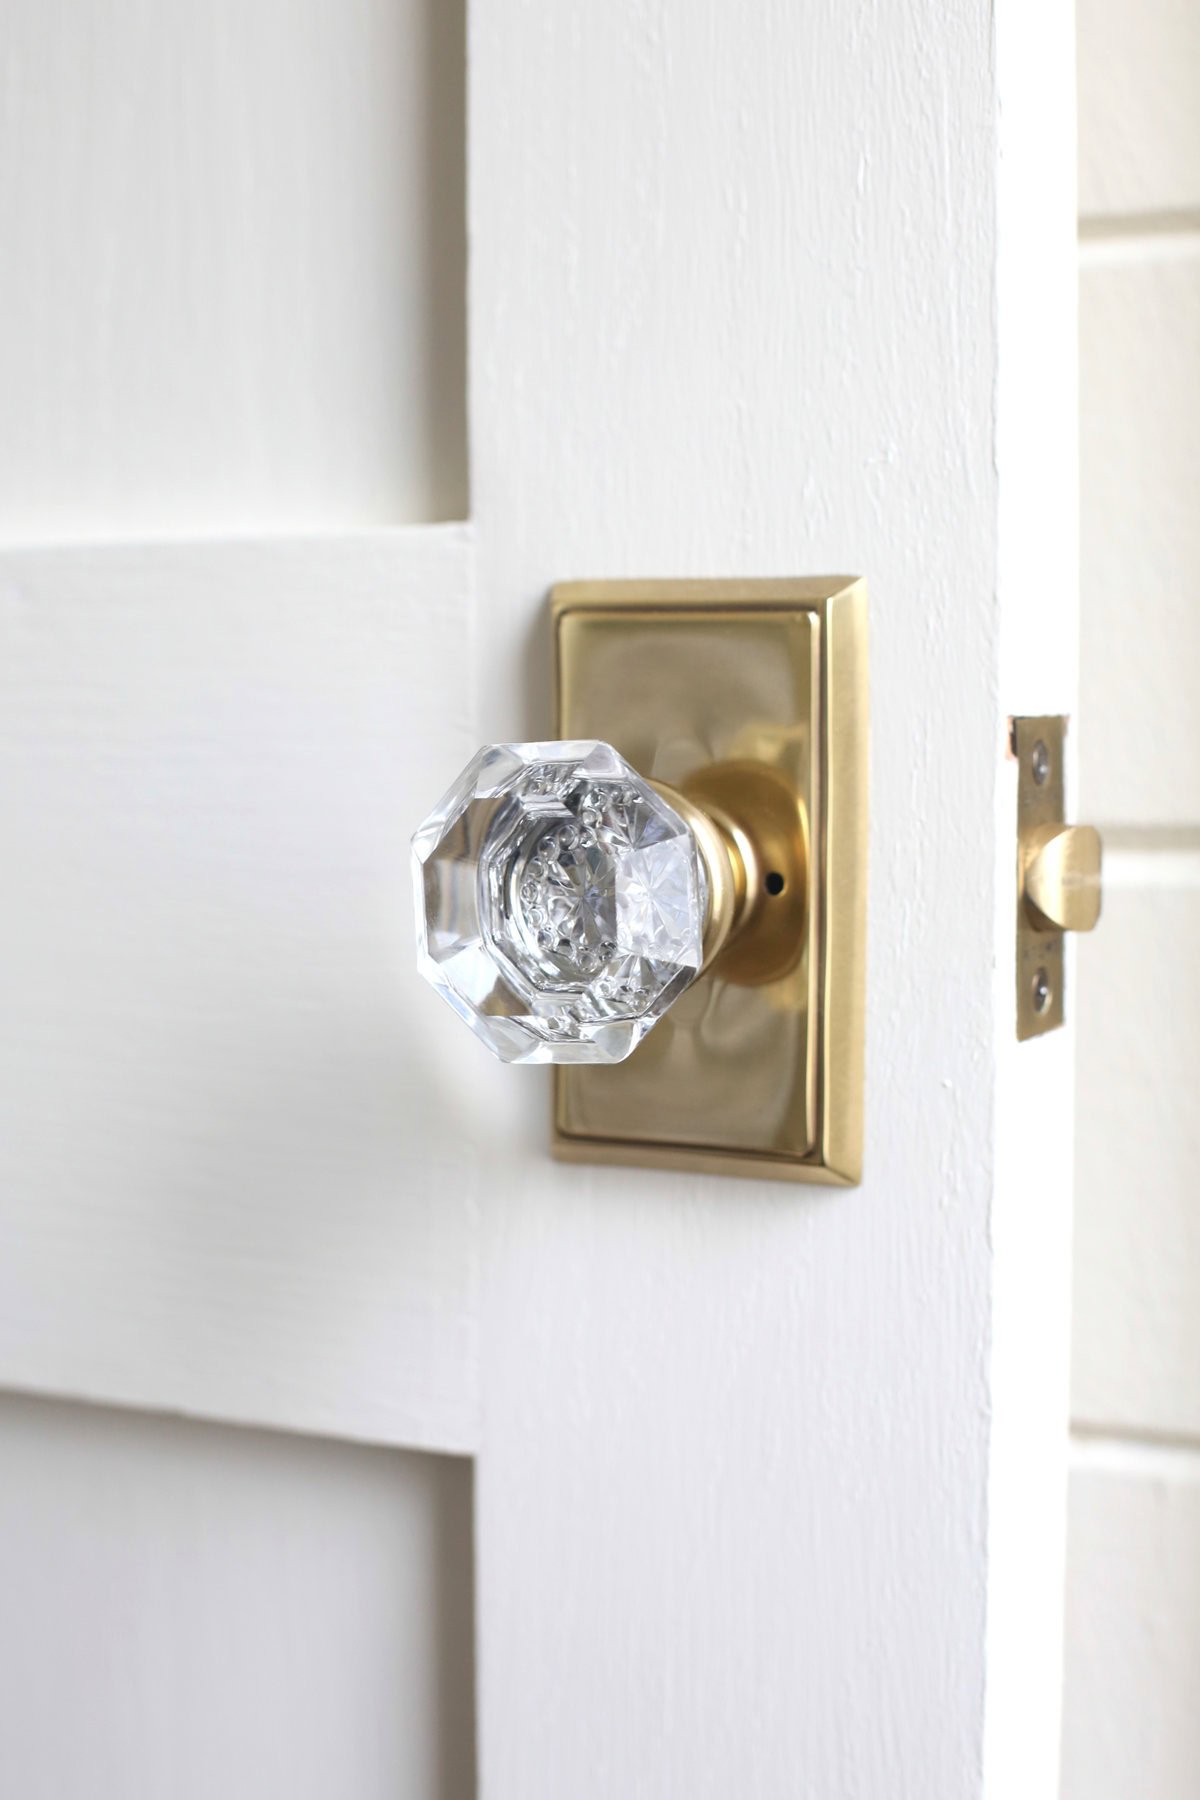 A clear glass doorknob with a brass base, mounted on a white door partially open against a white wall.